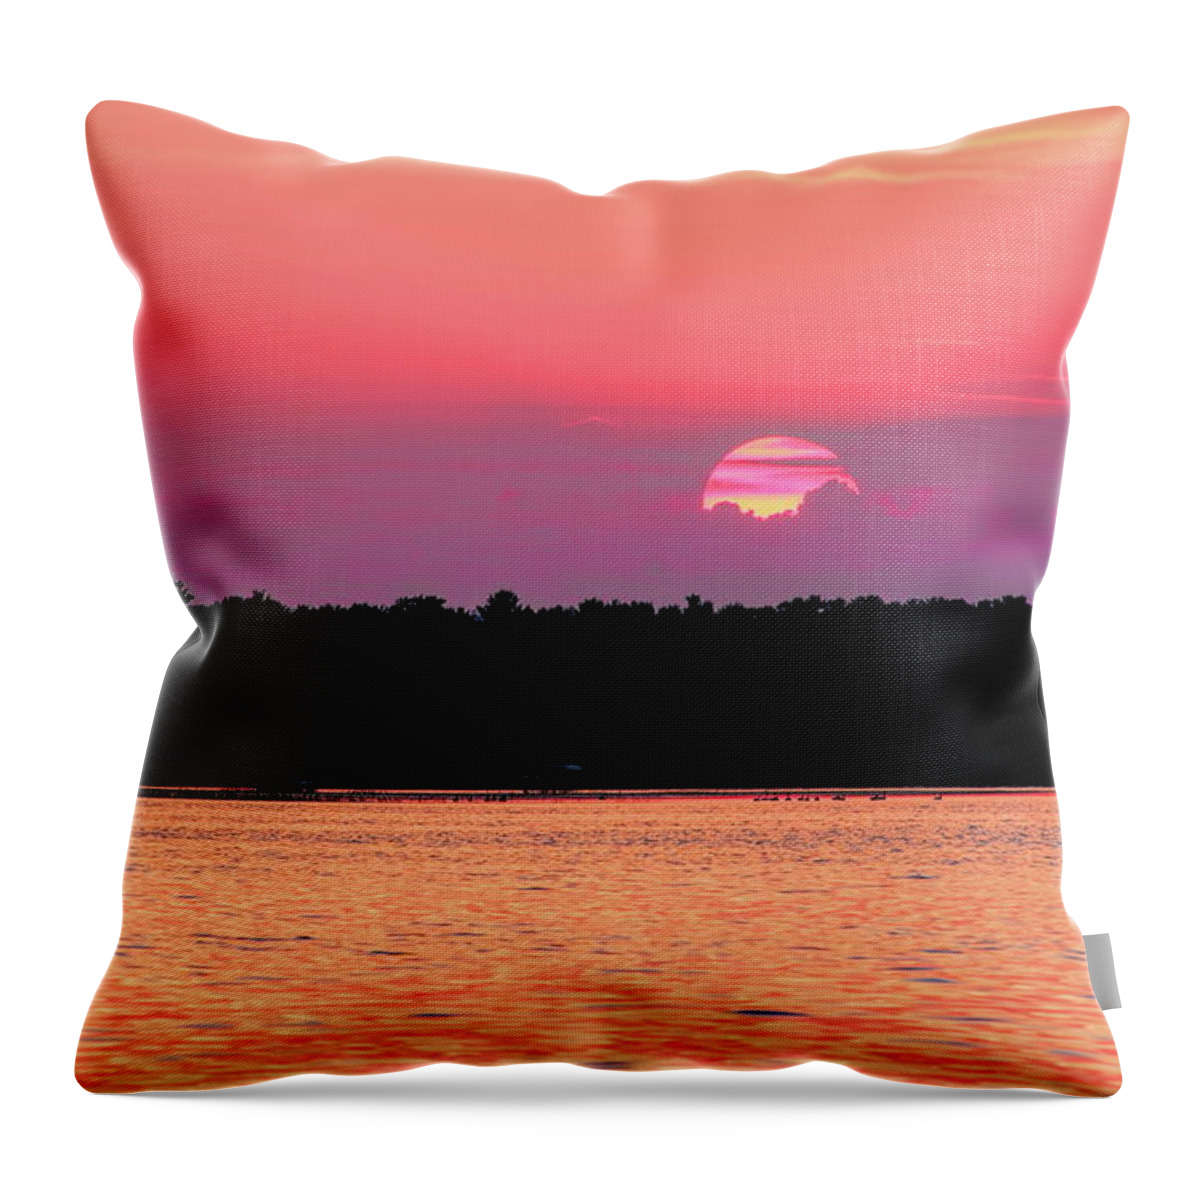 Sunset Throw Pillow featuring the photograph Striped Setting Sun Over Water by Dale Kauzlaric